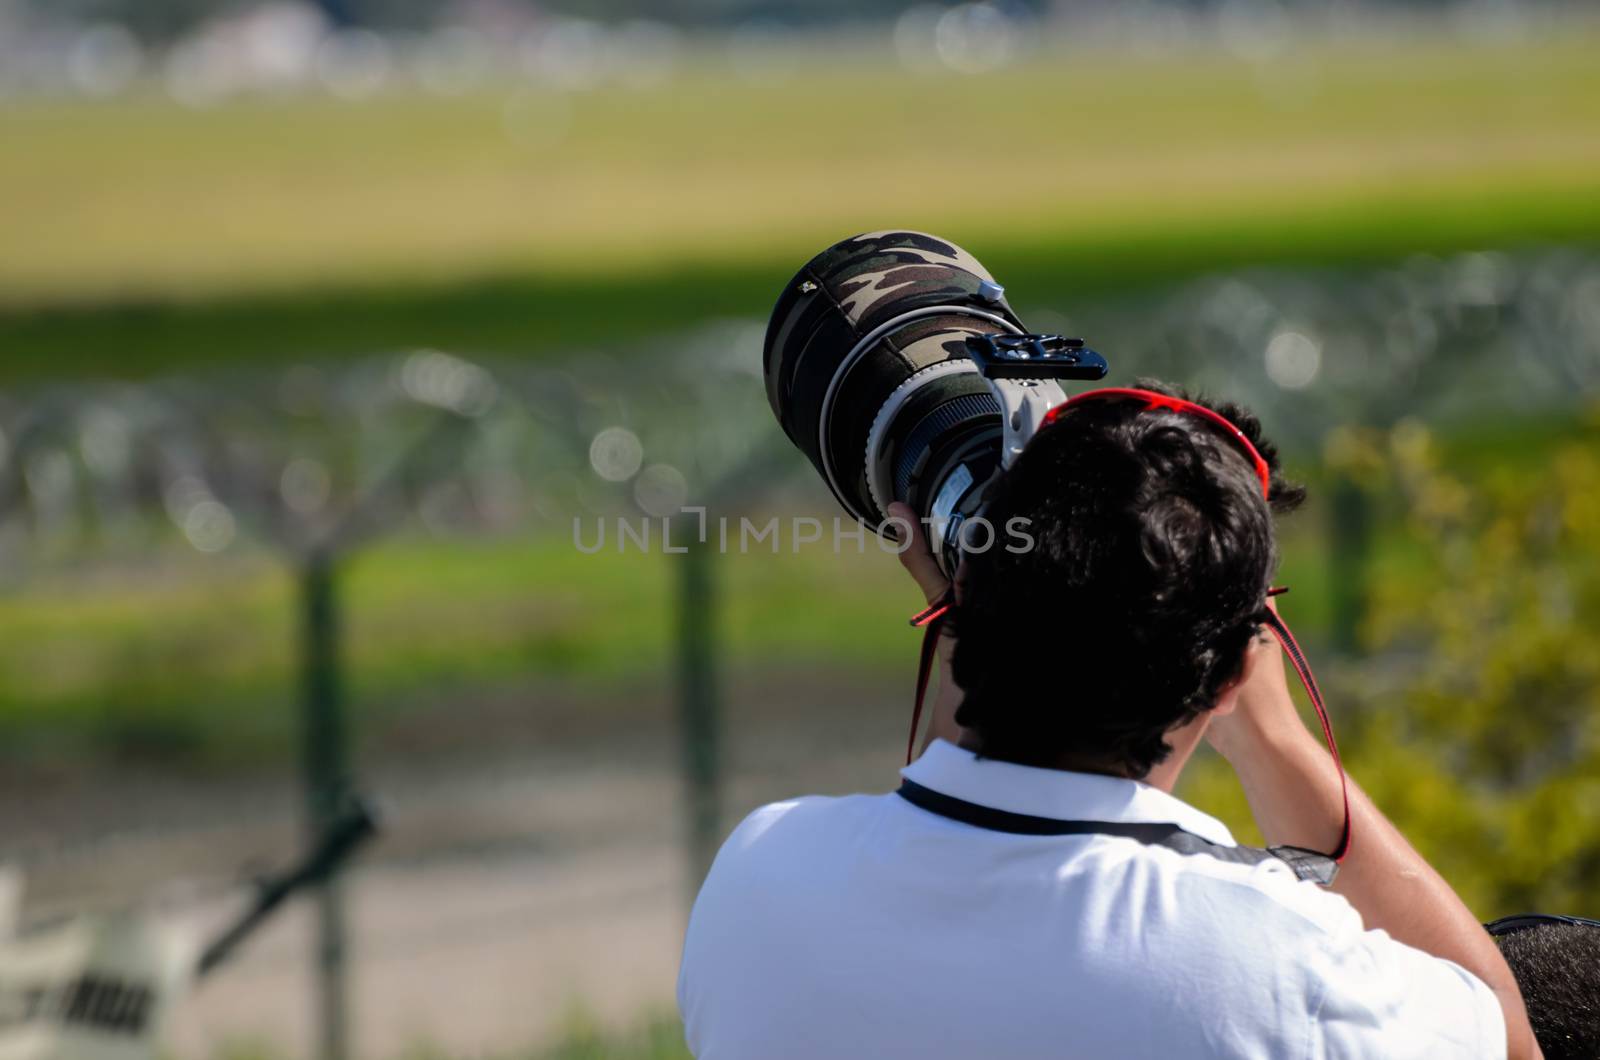 Aircraft spotter with camera by Attila